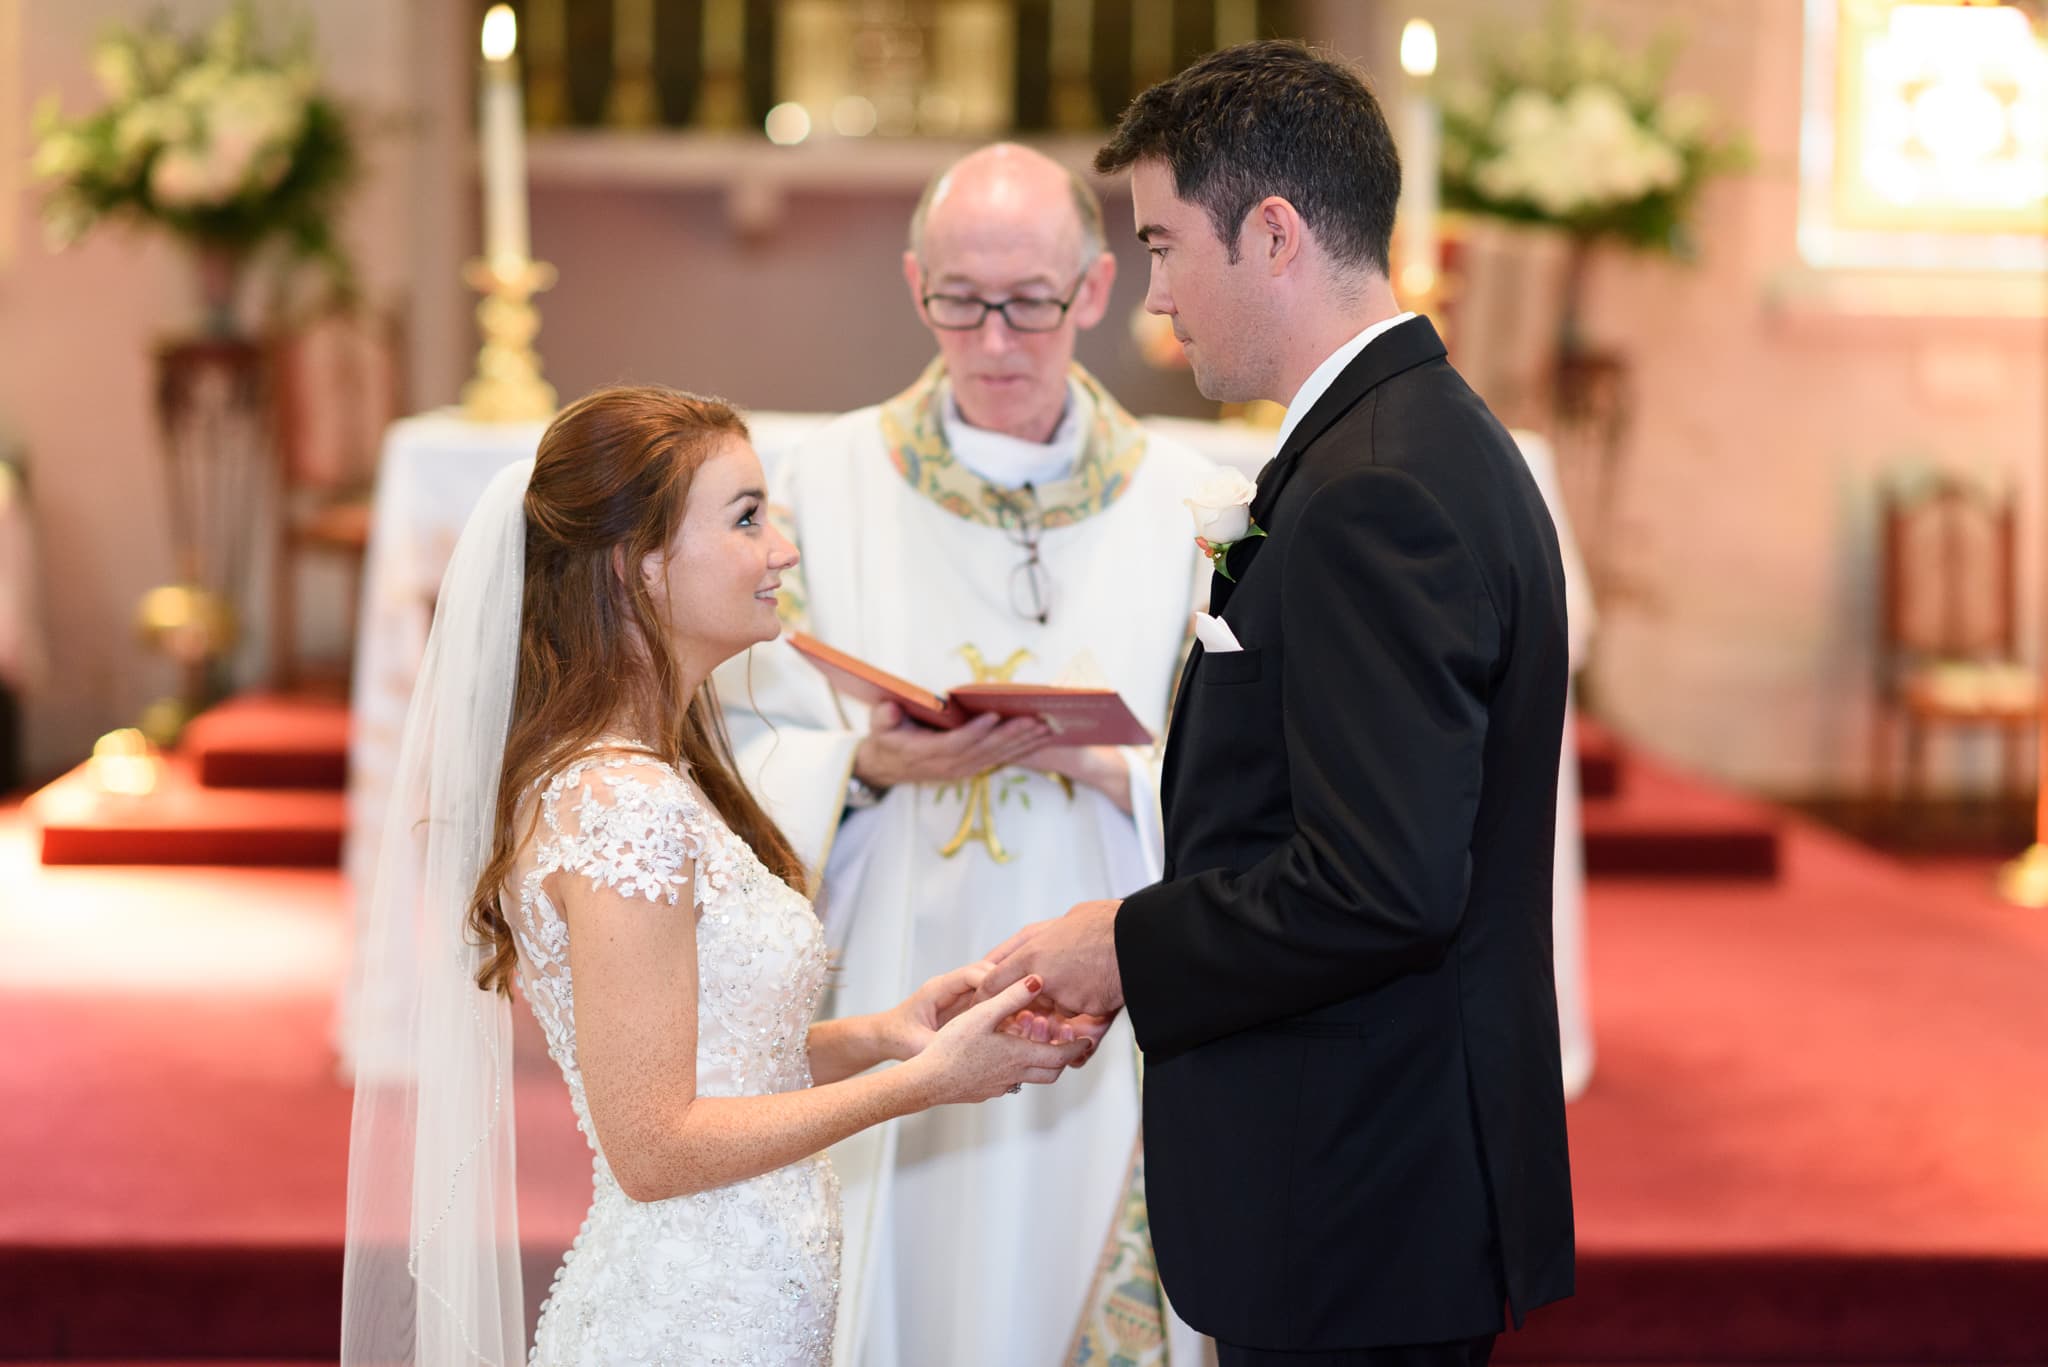 Giving vows - Historic Church downtown Georgetown